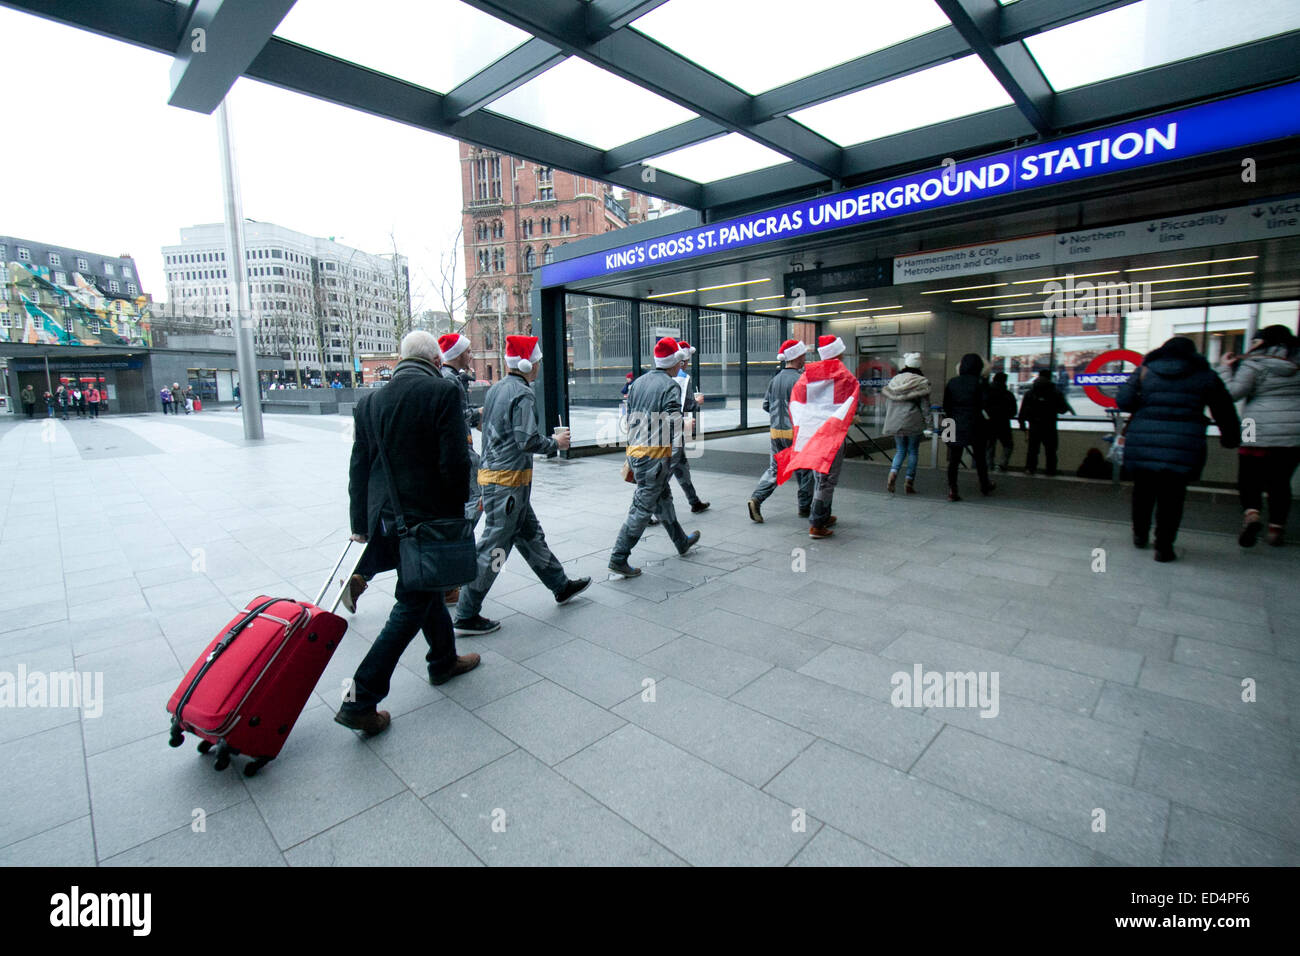 London UK. 27th December 2014. Trains have been cancelled at Kings Cross mainline station due to overrunning engineering works causing major disruption to passenger travel plans © amer ghazzal/Alamy Live News Stock Photo